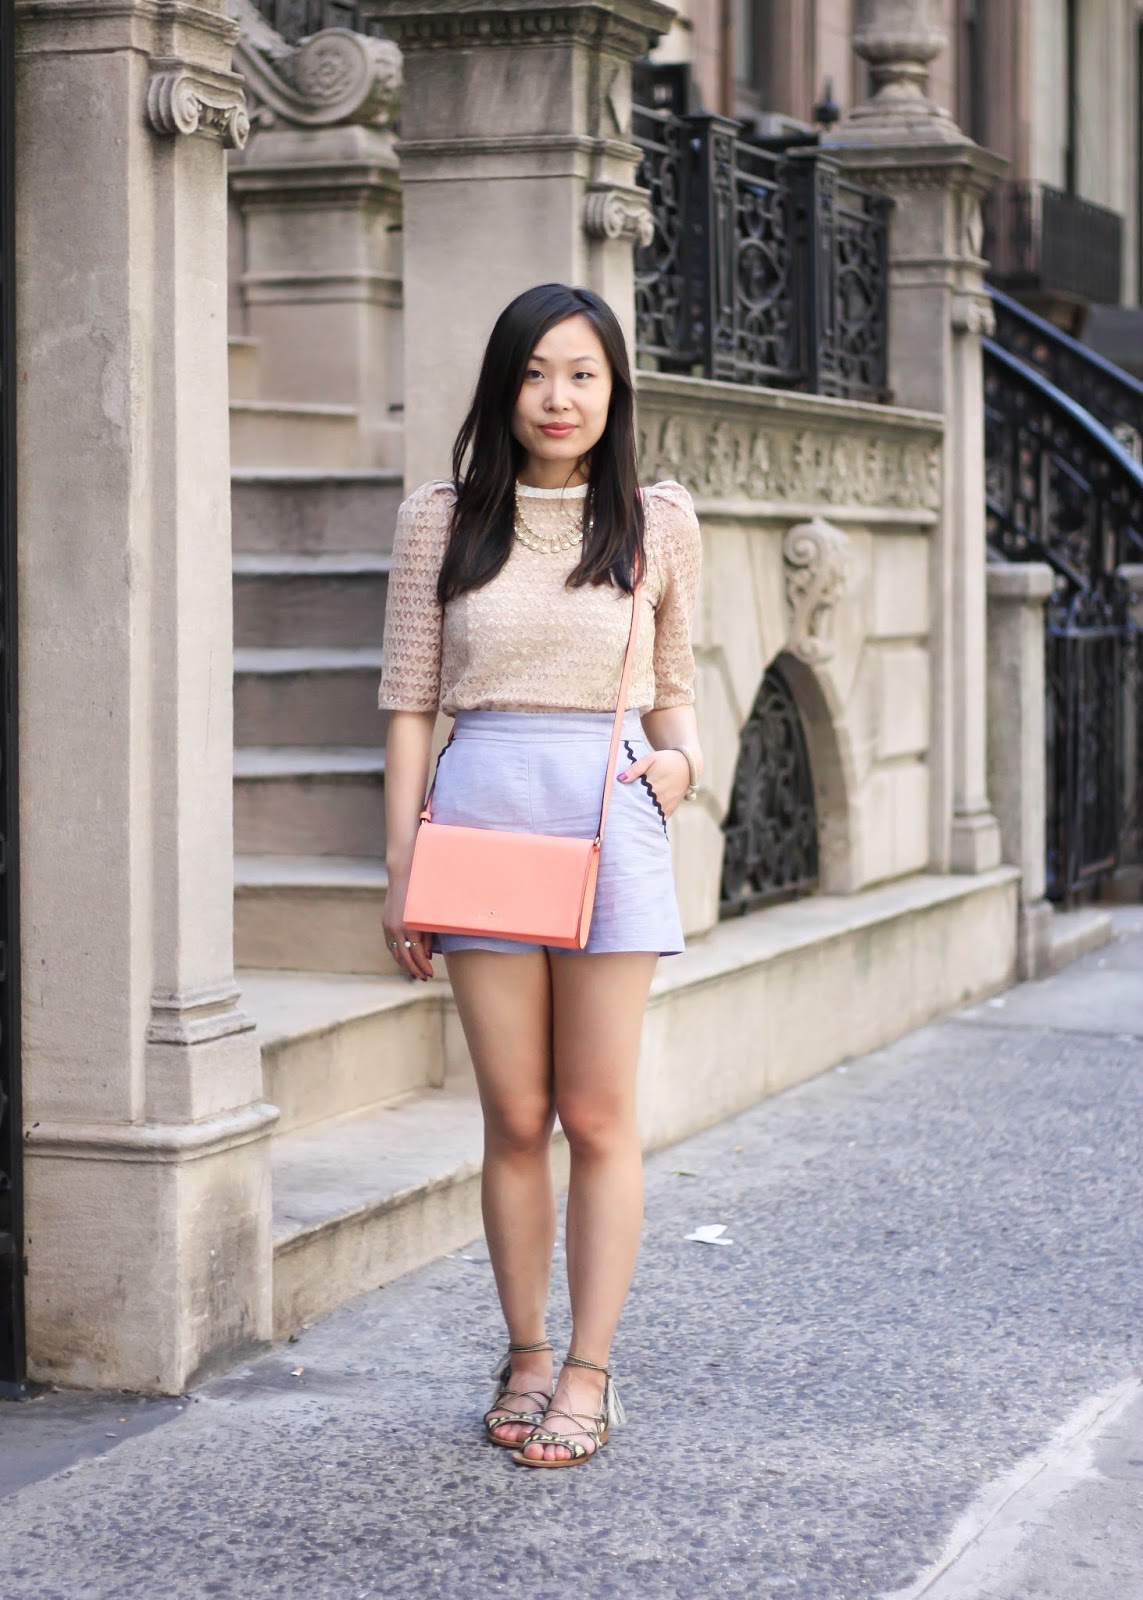 Dressed-Up Summer Shorts and Vintage Lace Top, Layers of Chic 